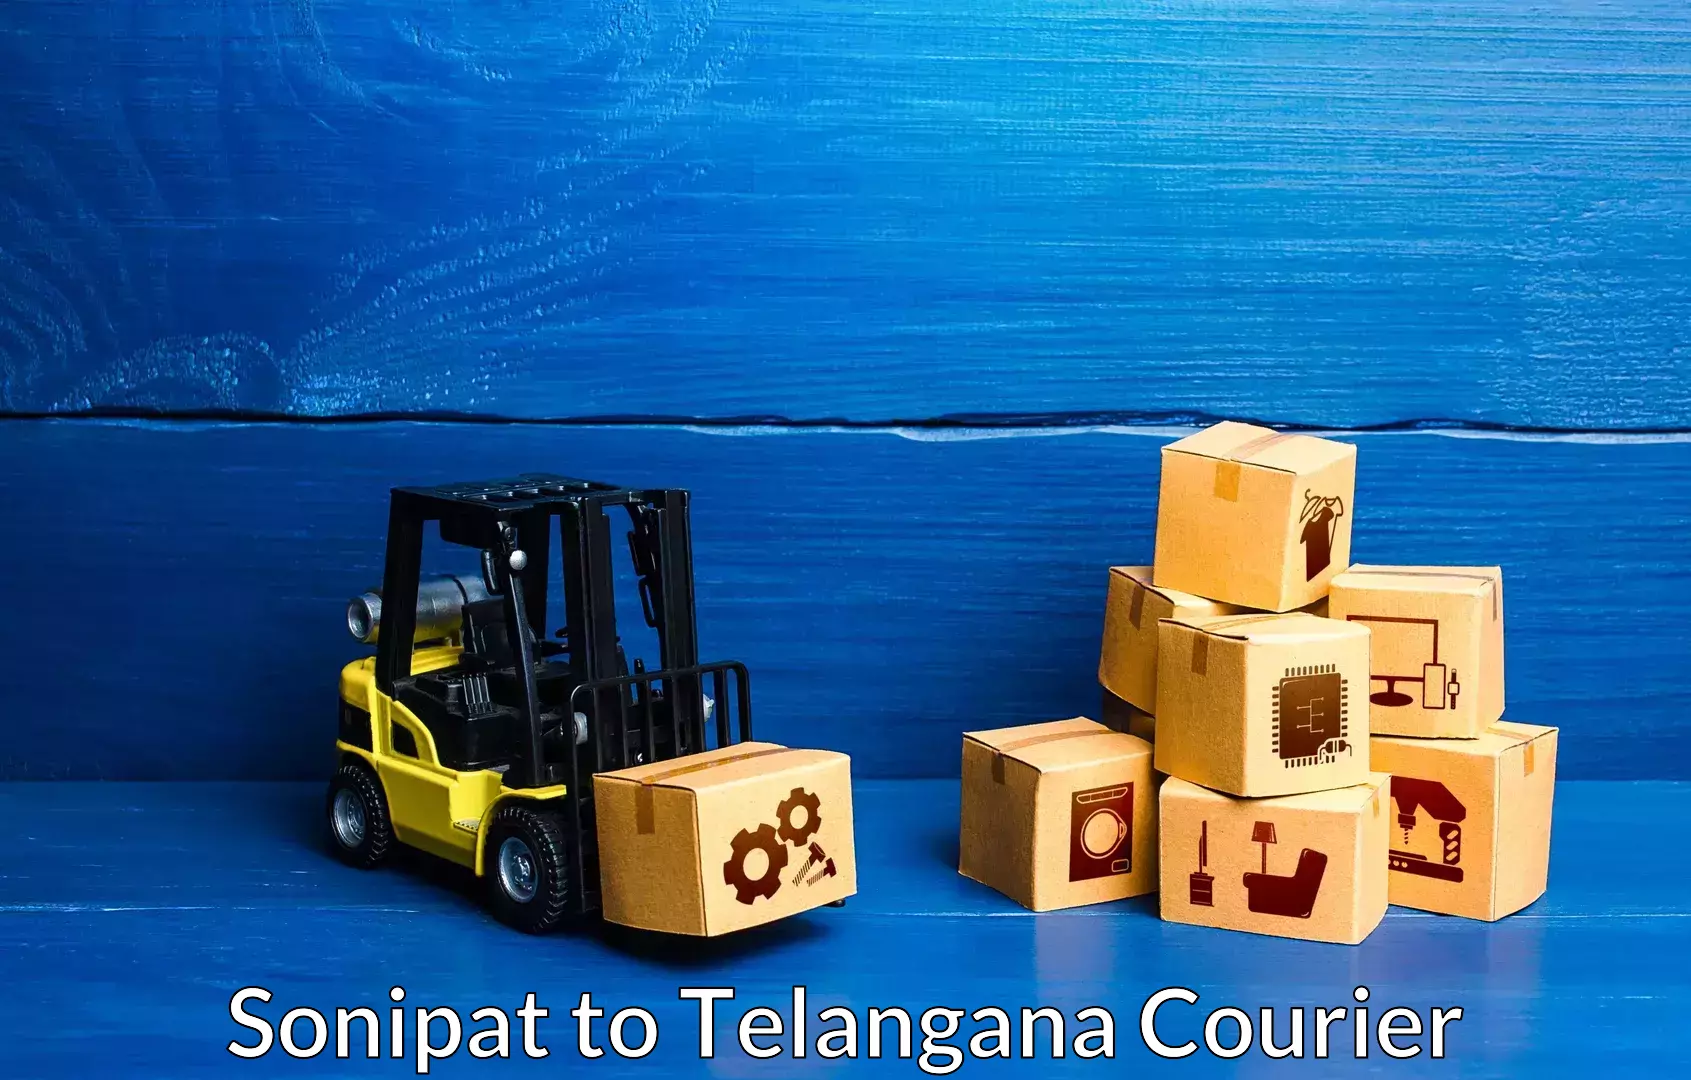 Trusted relocation experts Sonipat to Telangana